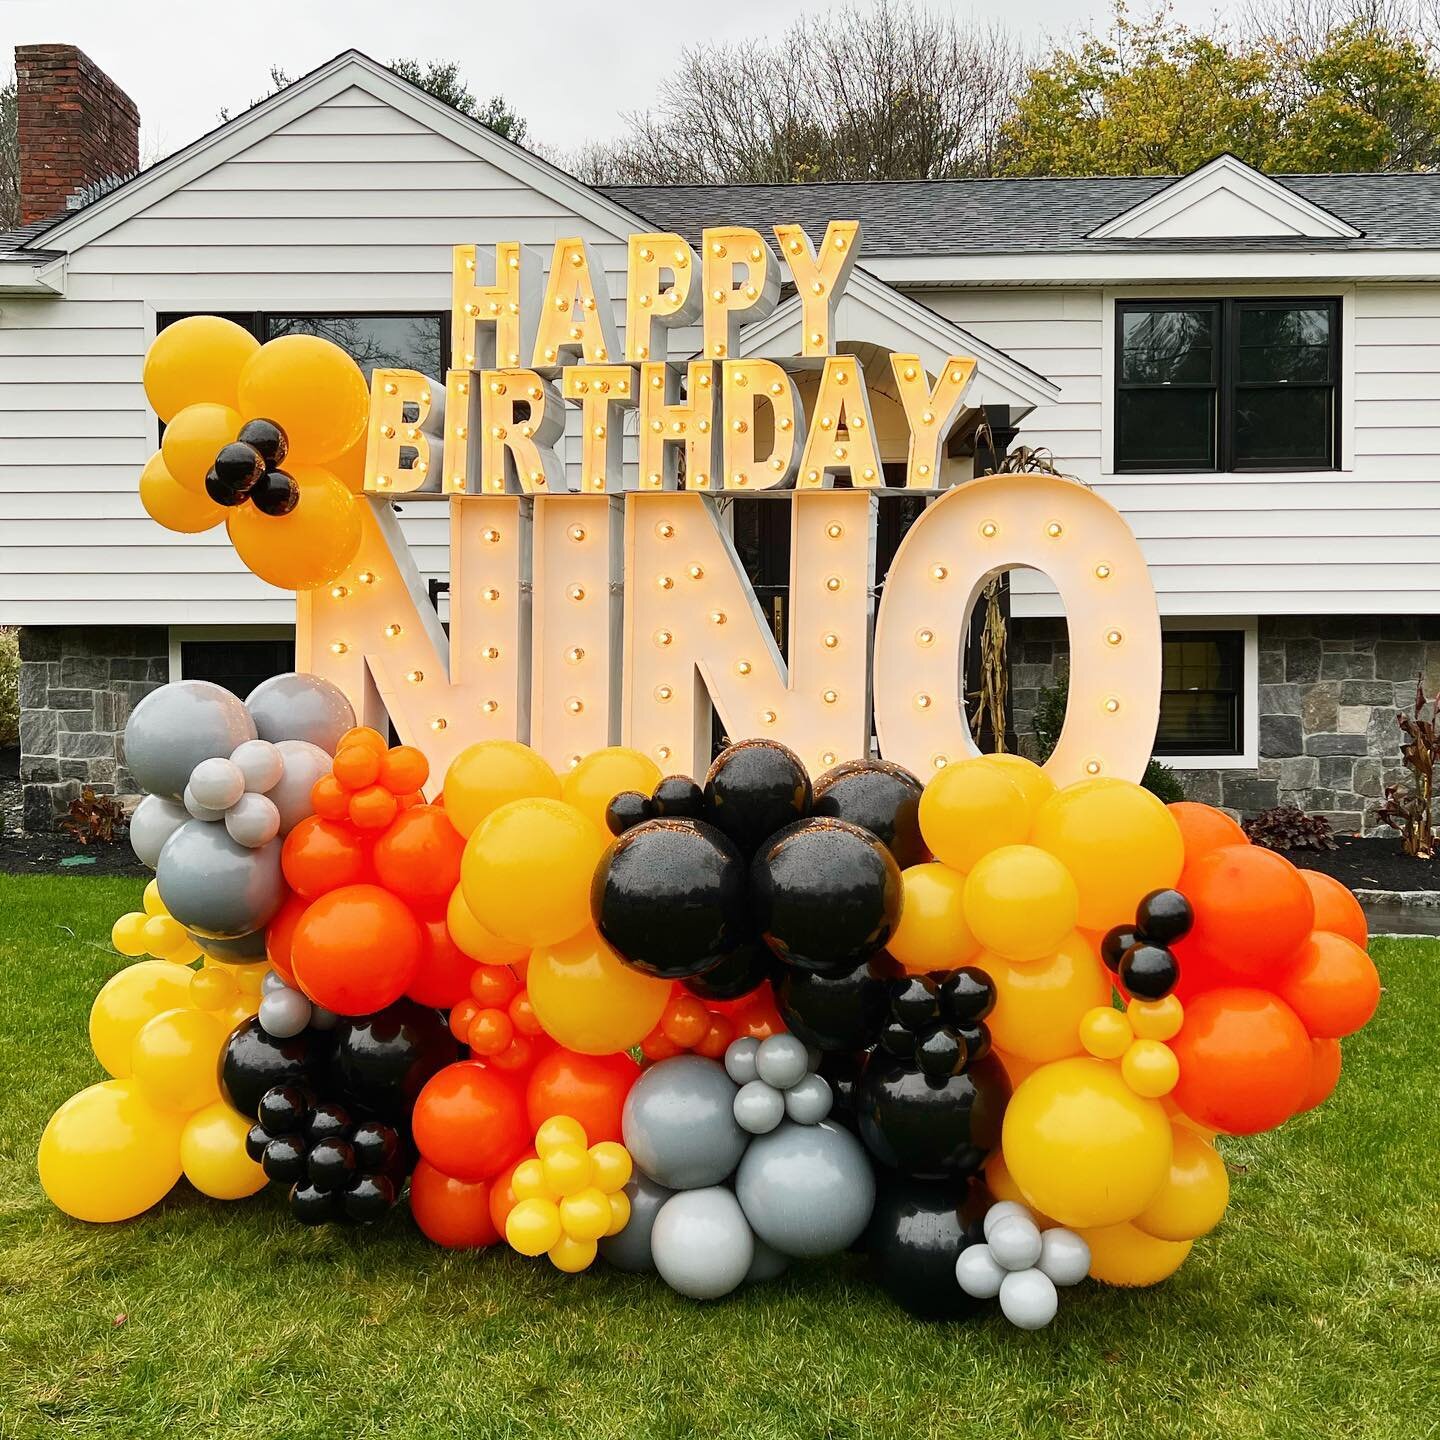 Nino&rsquo;s Birthday is always an EVENT and I love collaborating with @ang_fed on all the details. 😍

This construction themed party was everything and I was so happy to be a part of &lsquo;Nino&rsquo;s Big Dig&rsquo; 🦺&hearts;️🚜

Happy Birthday 